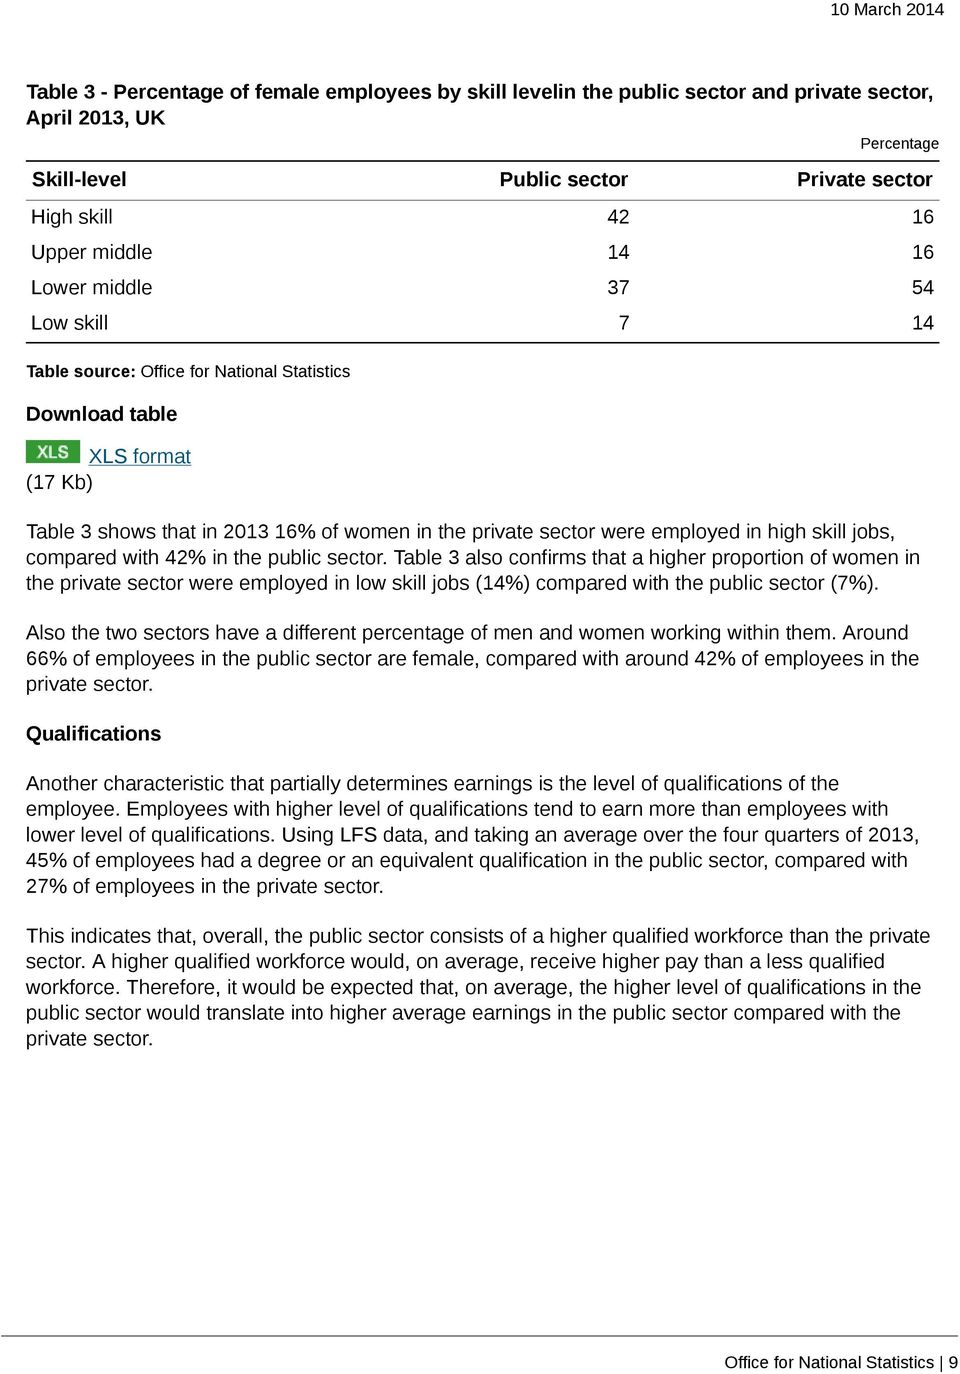 42% in the public sector. Table 3 also confirms that a higher proportion of women in the private sector were employed in low skill jobs (14%) compared with the public sector (7%).